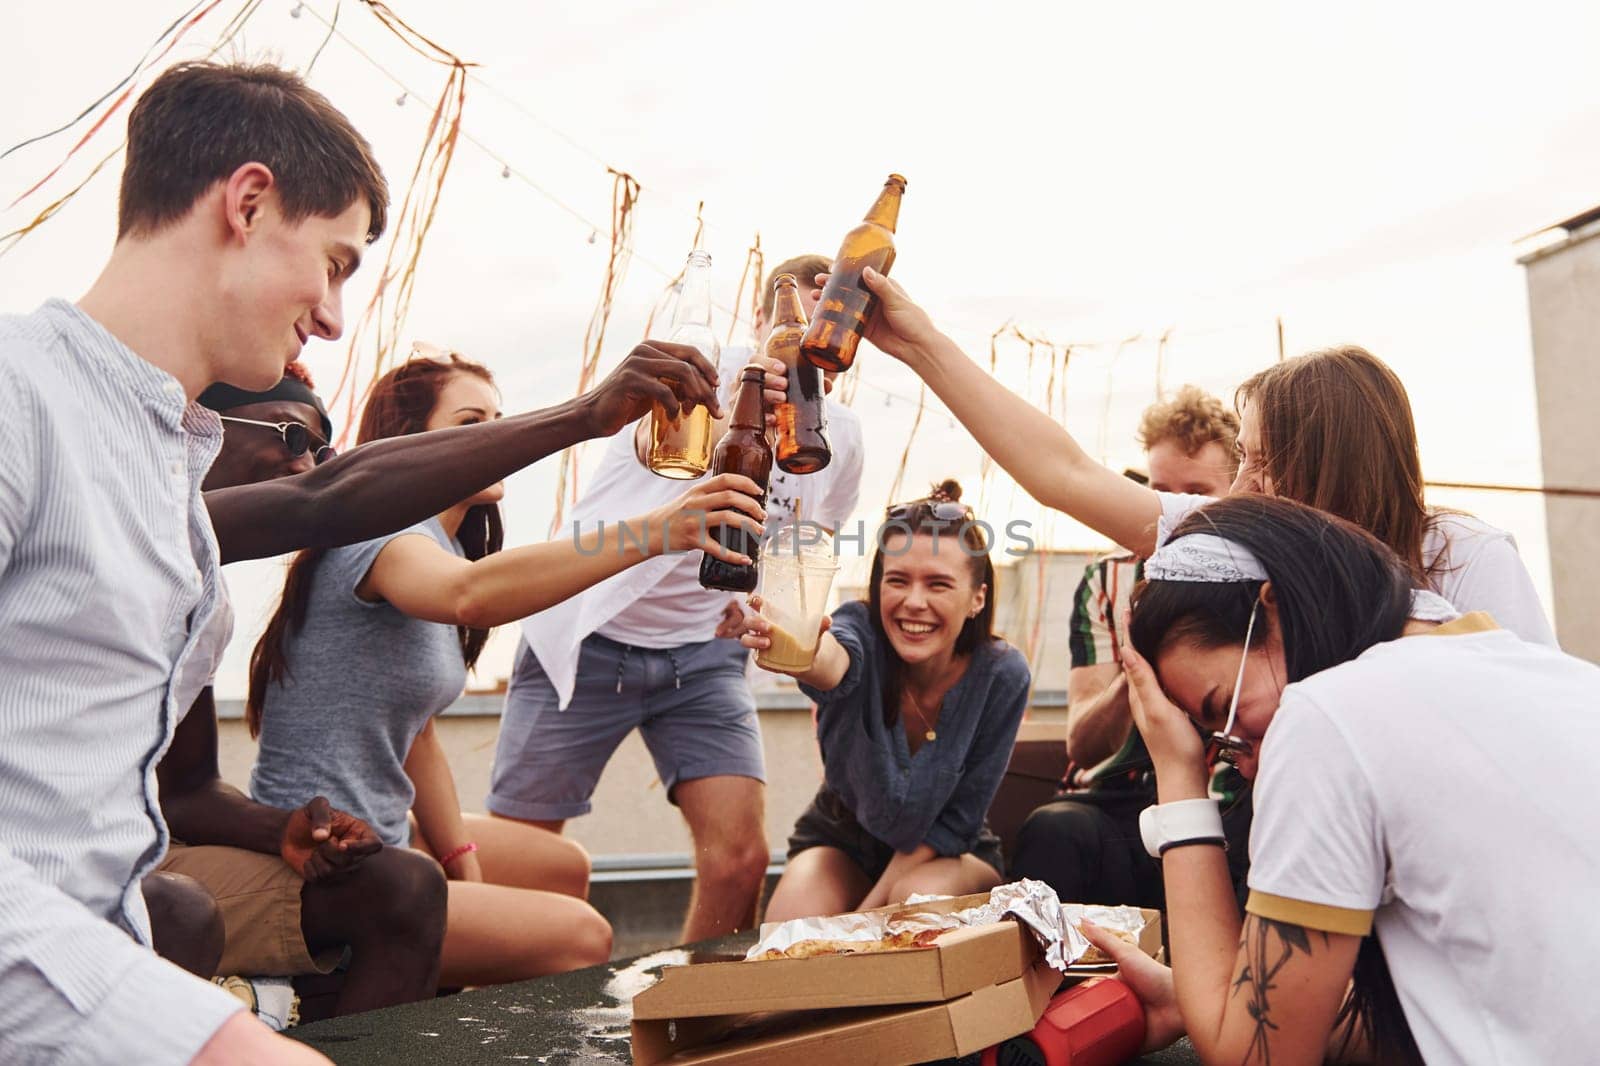 Doing cheers by bottles with beer. Group of young people in casual clothes have a party at rooftop together at daytime.